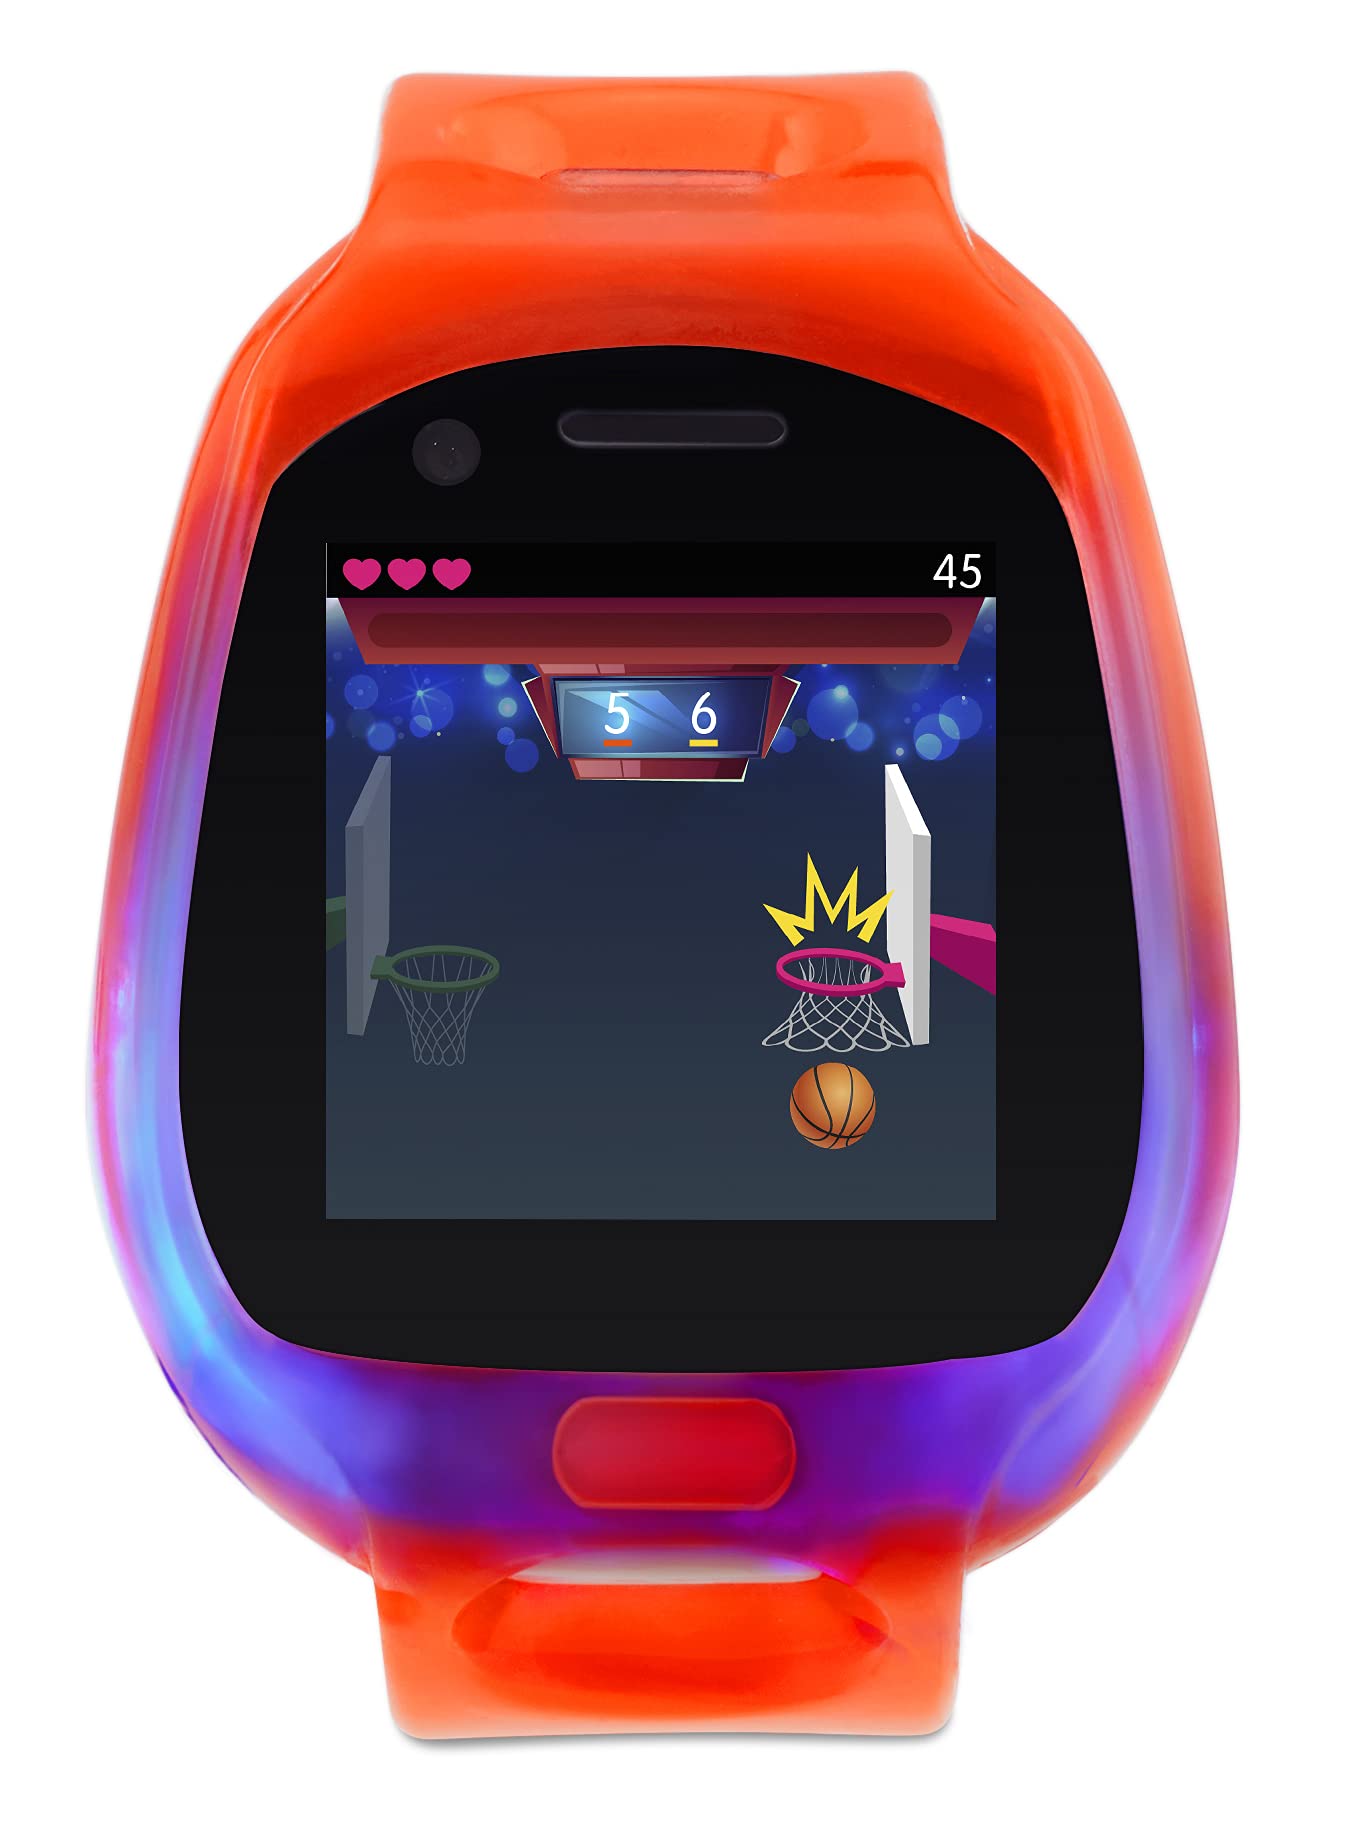 Little Tikes Tobi 2 Robot Red Smartwatch with Head-to-Head Gaming, Advanced Graphics, Motion-Activated Selfie Camera, Fun Expressions, Games, Pedometer, Splashproof, Wireless Connectivity, Video | 6+